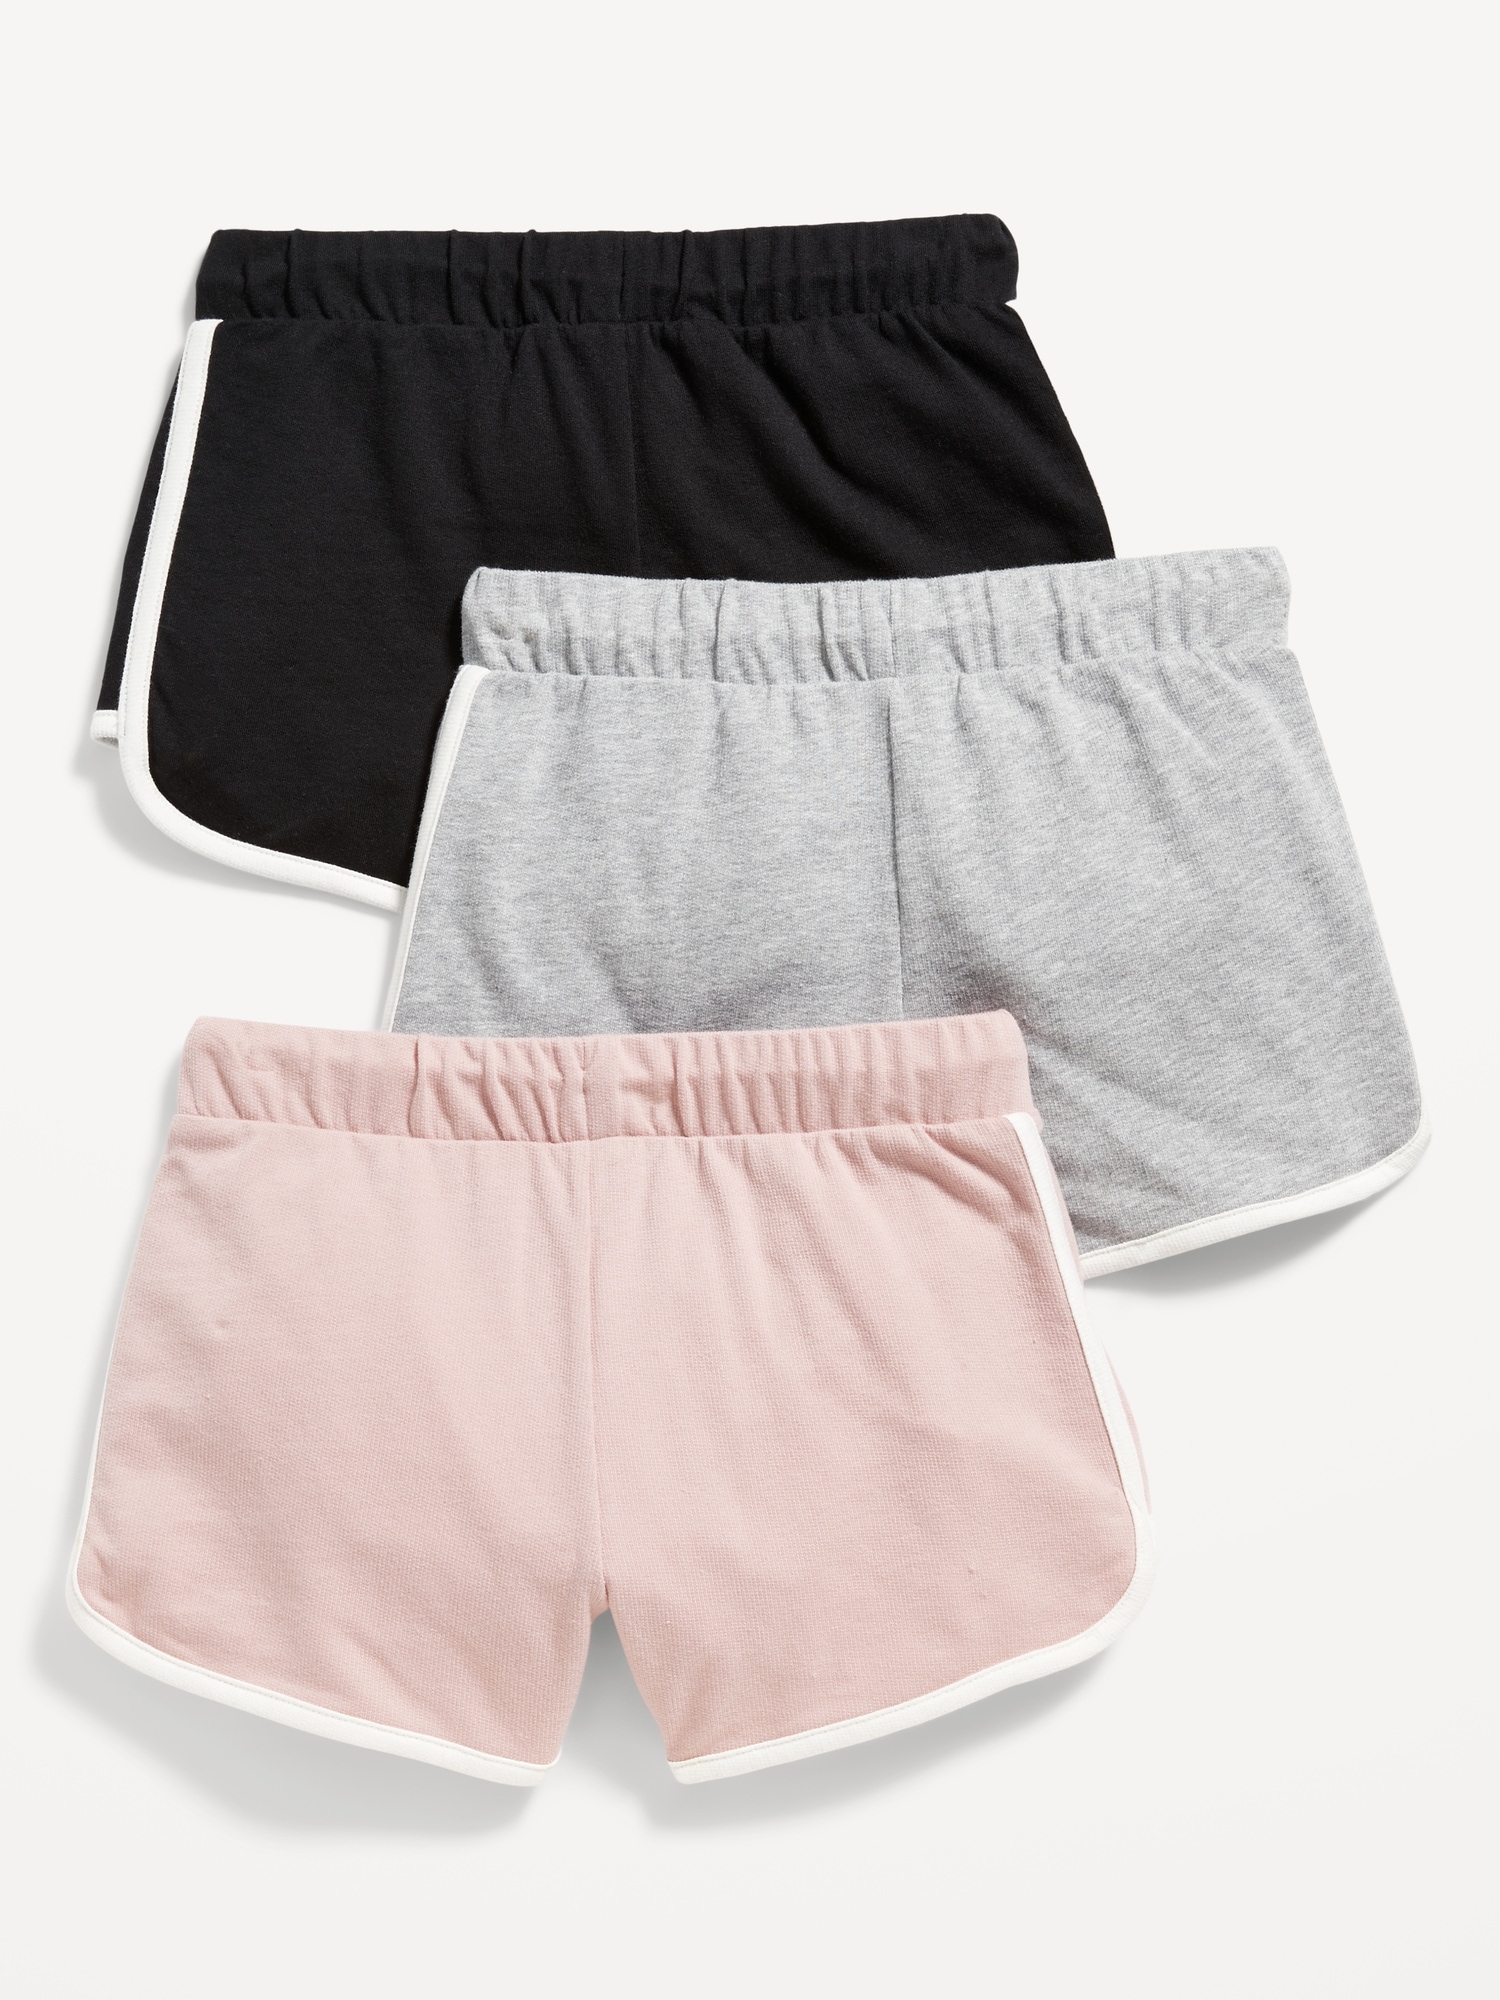 French Terry Dolphin-Hem Cheer Shorts 3-Pack for Girls | Old Navy